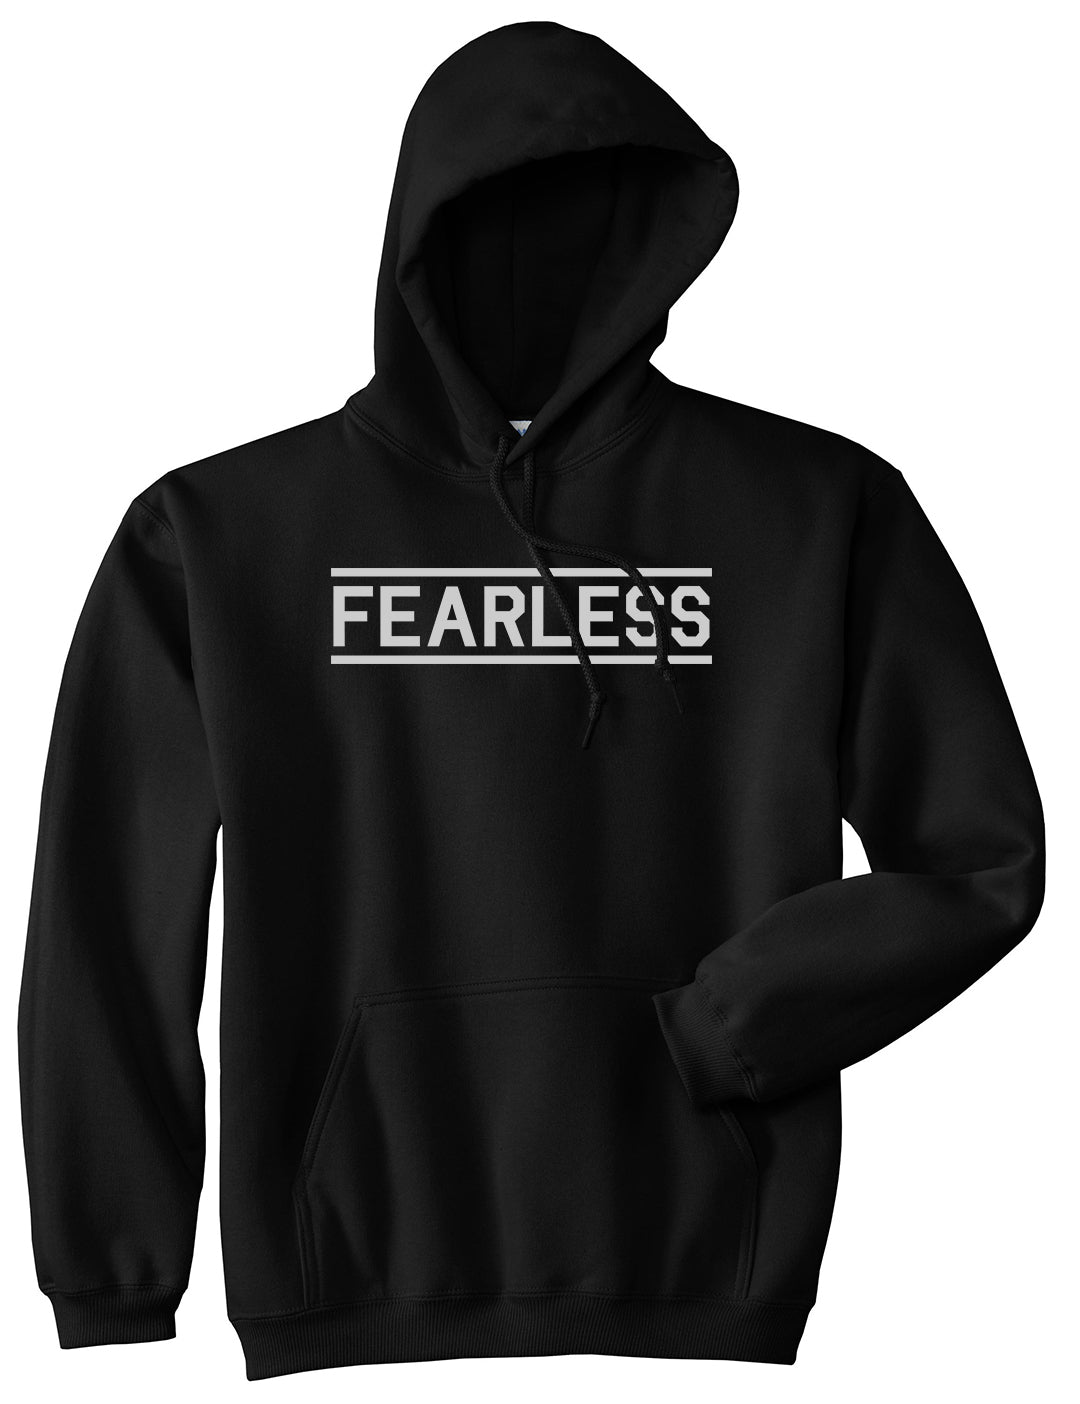 Fearless Gym Mens Black Pullover Hoodie by KINGS OF NY